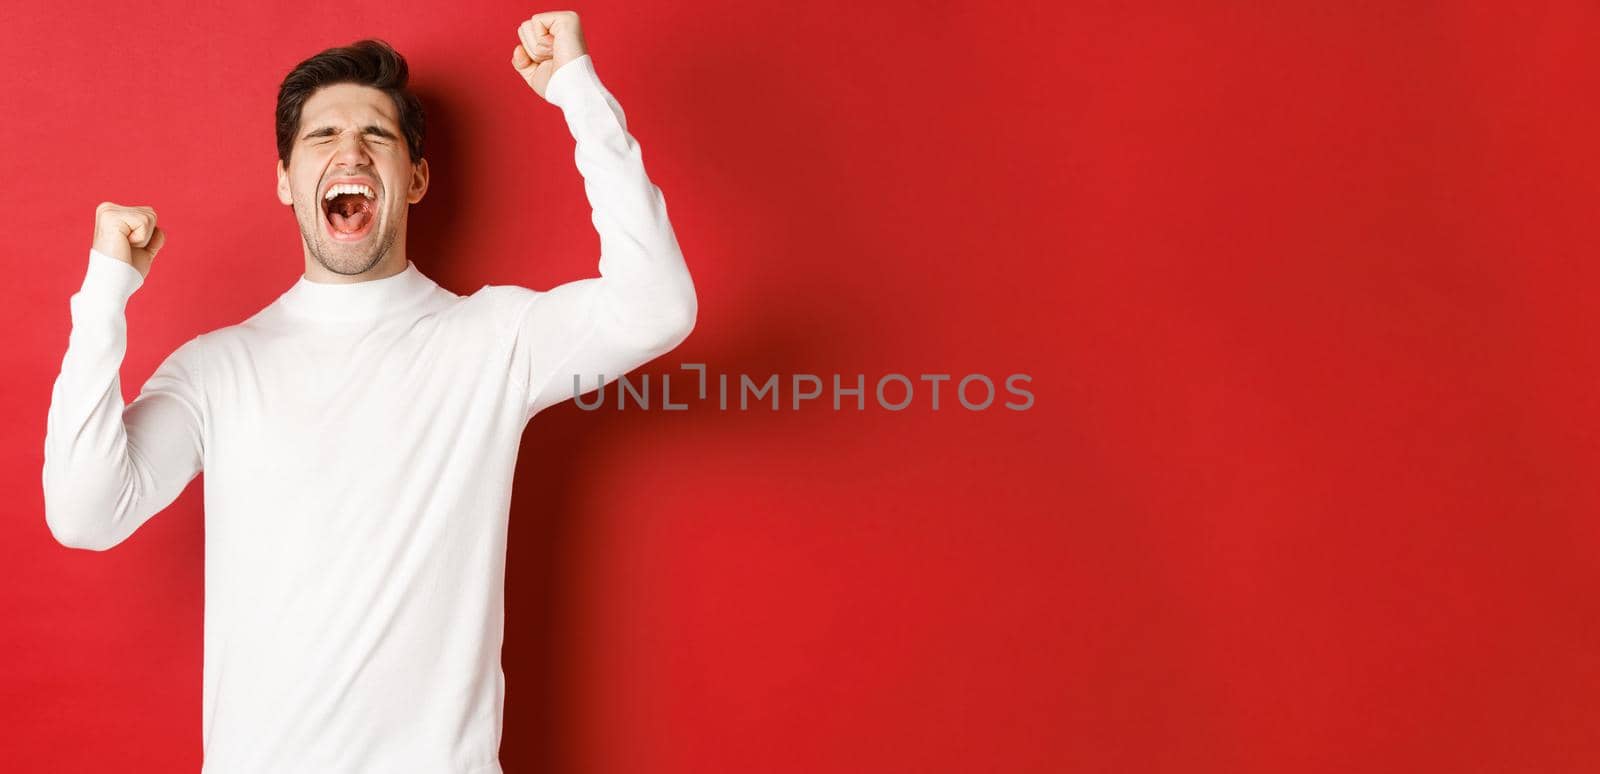 Portrait of handsome man in white sweater, feeling cheerful, celebrating victory, shouting for joy and raising hands up in victory, standing over red background.